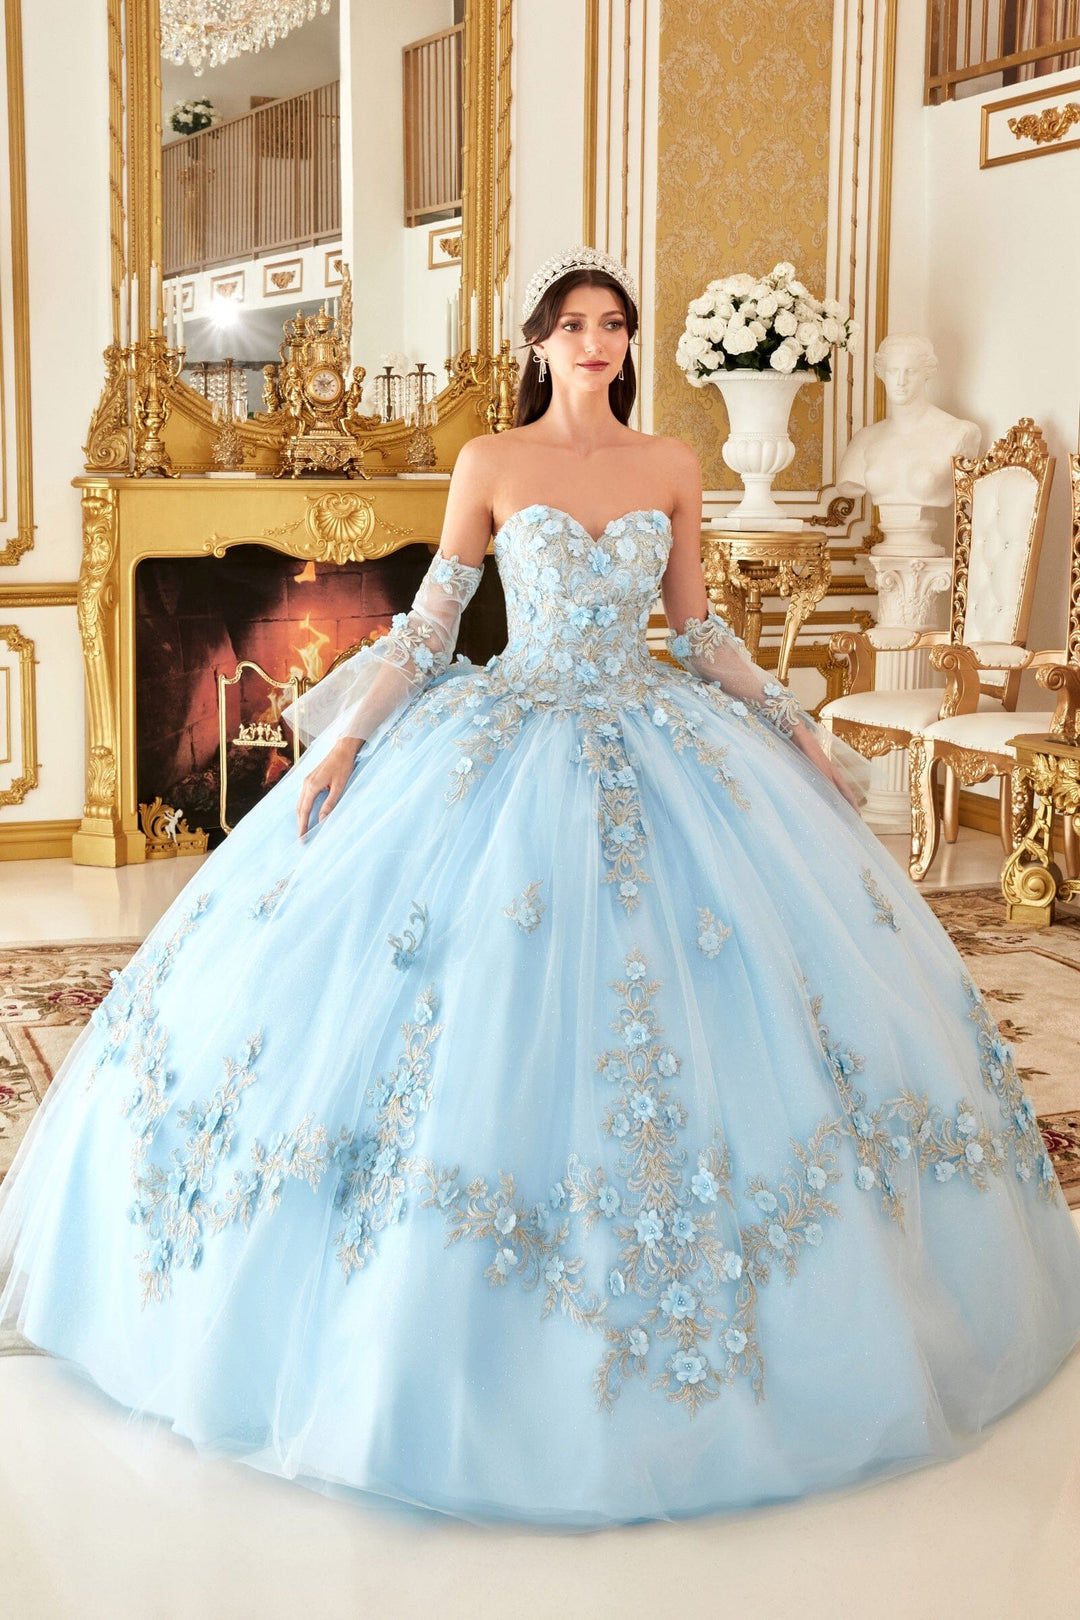 3D Floral Applique Strapless Ball Gown by Ladivine 15714